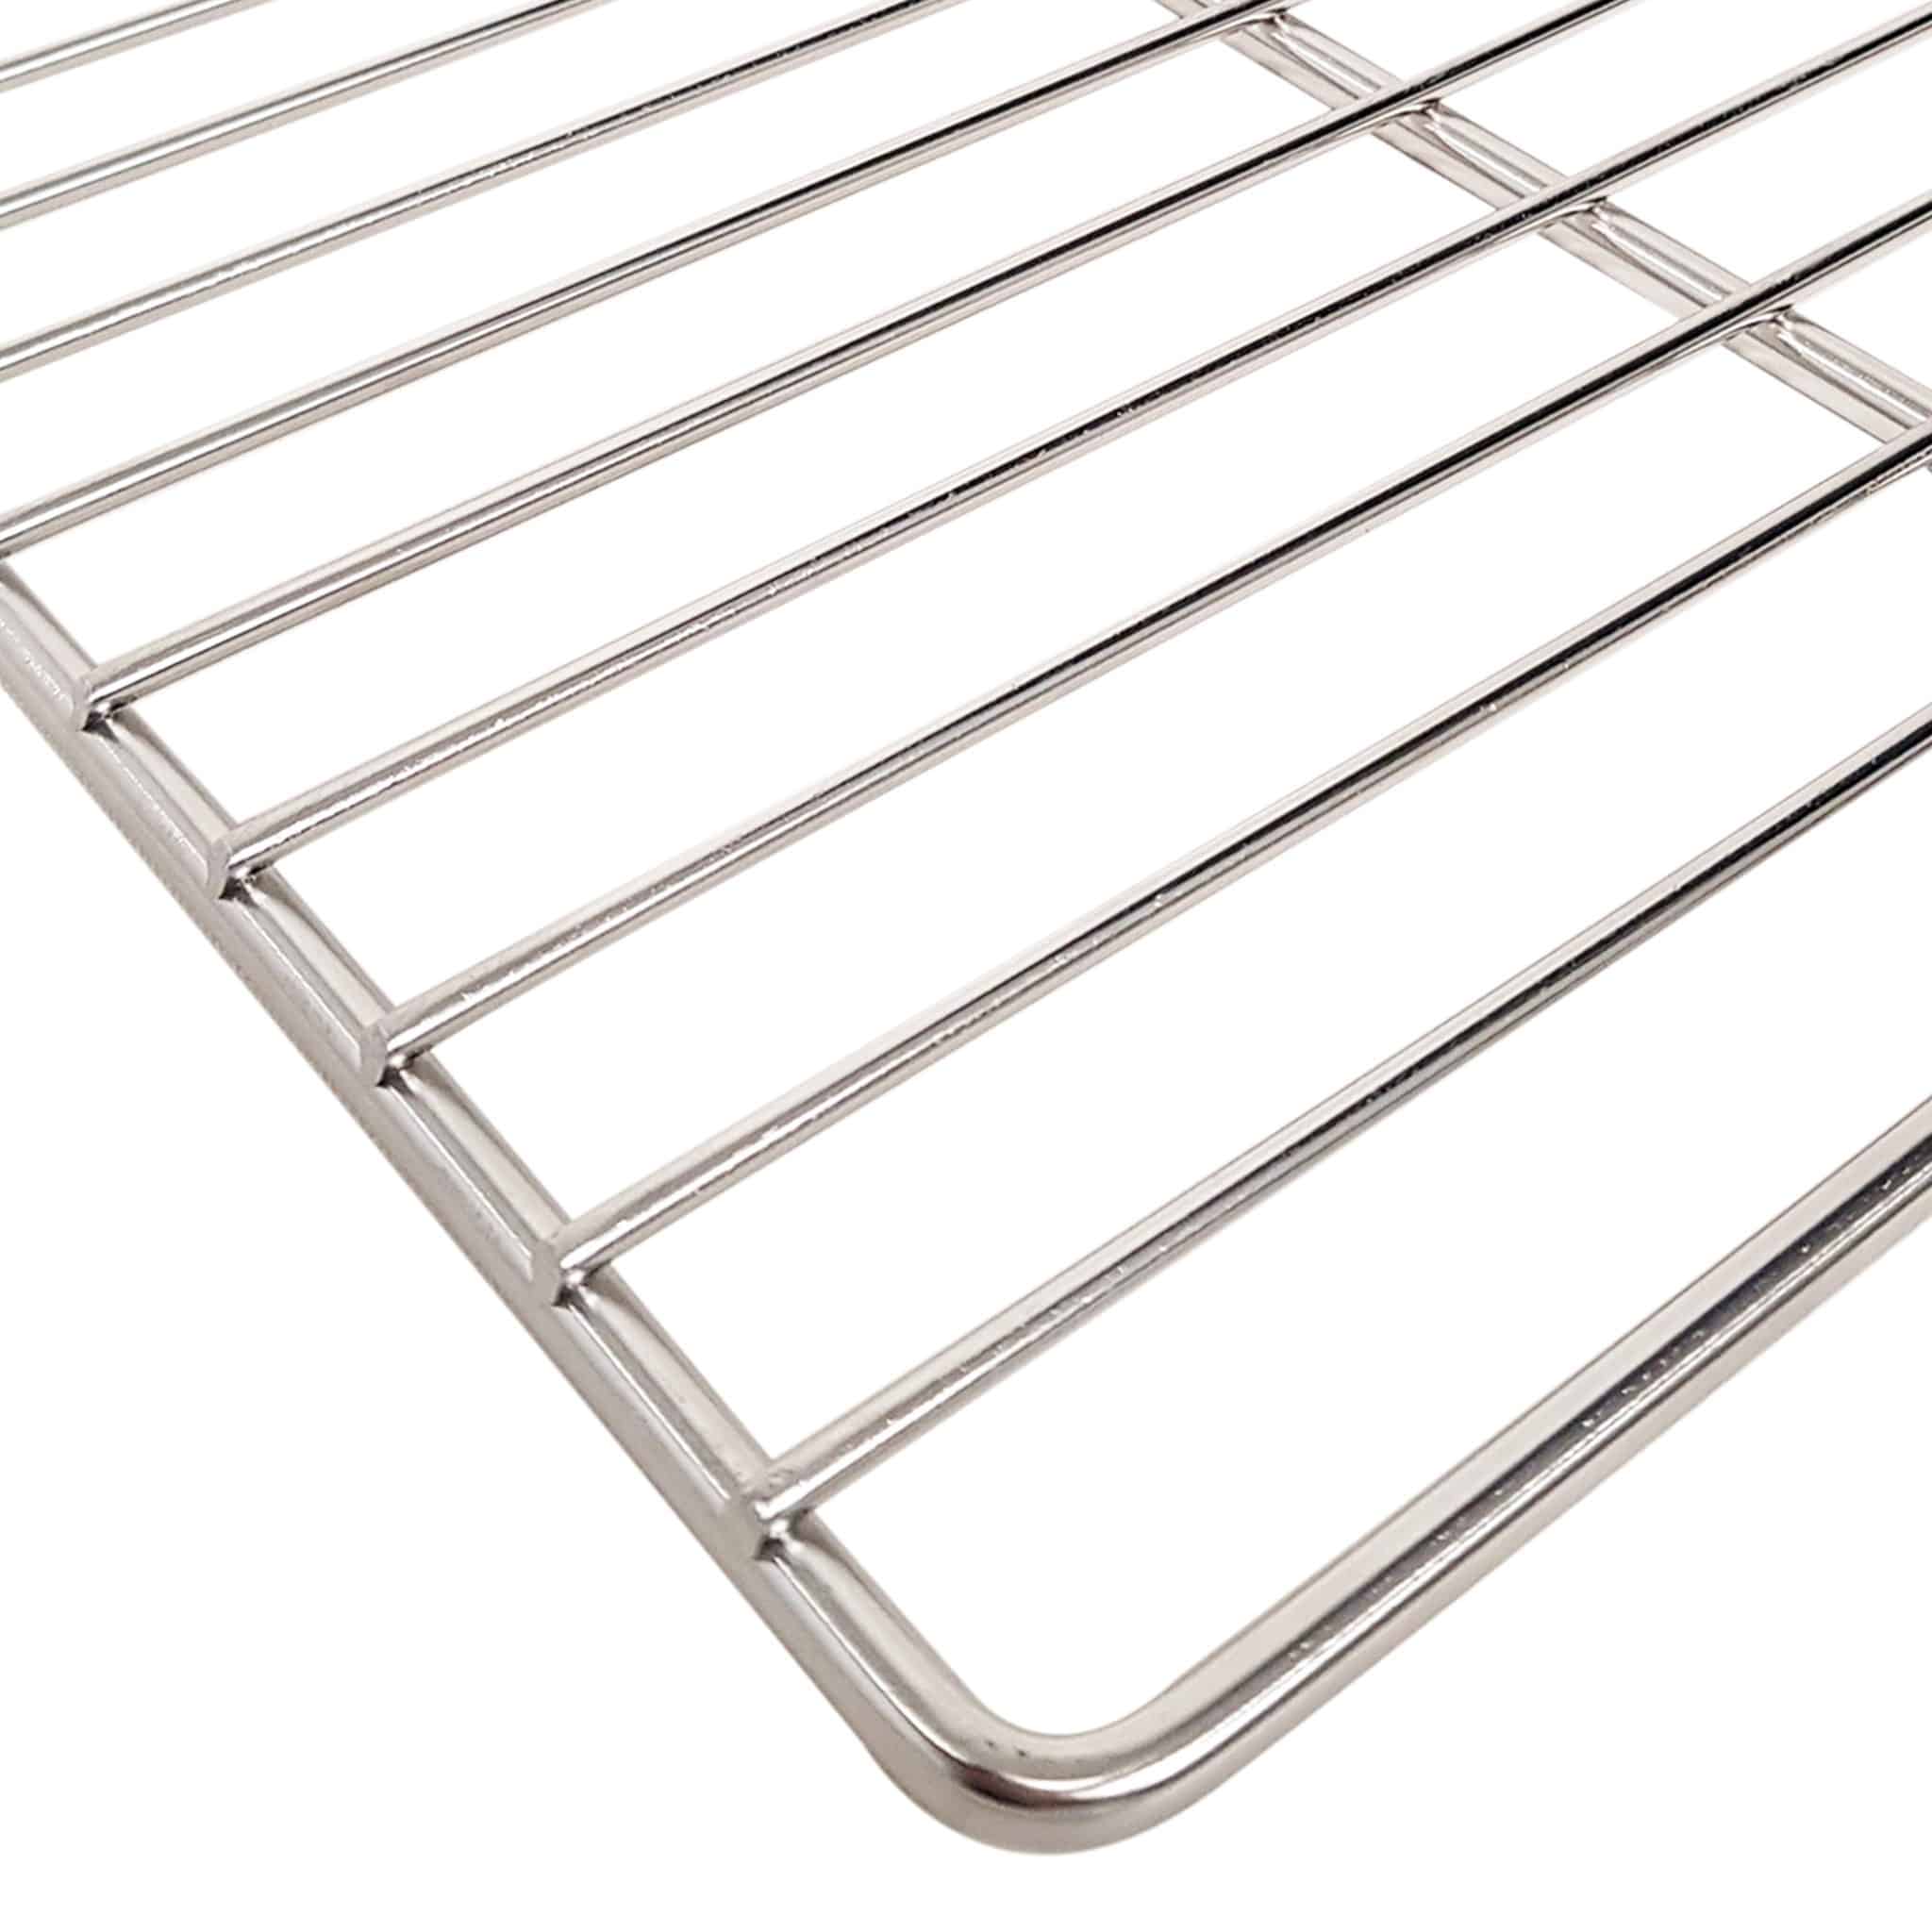 Stainless steel wire cooling rack on sale, Stainless steel cooling